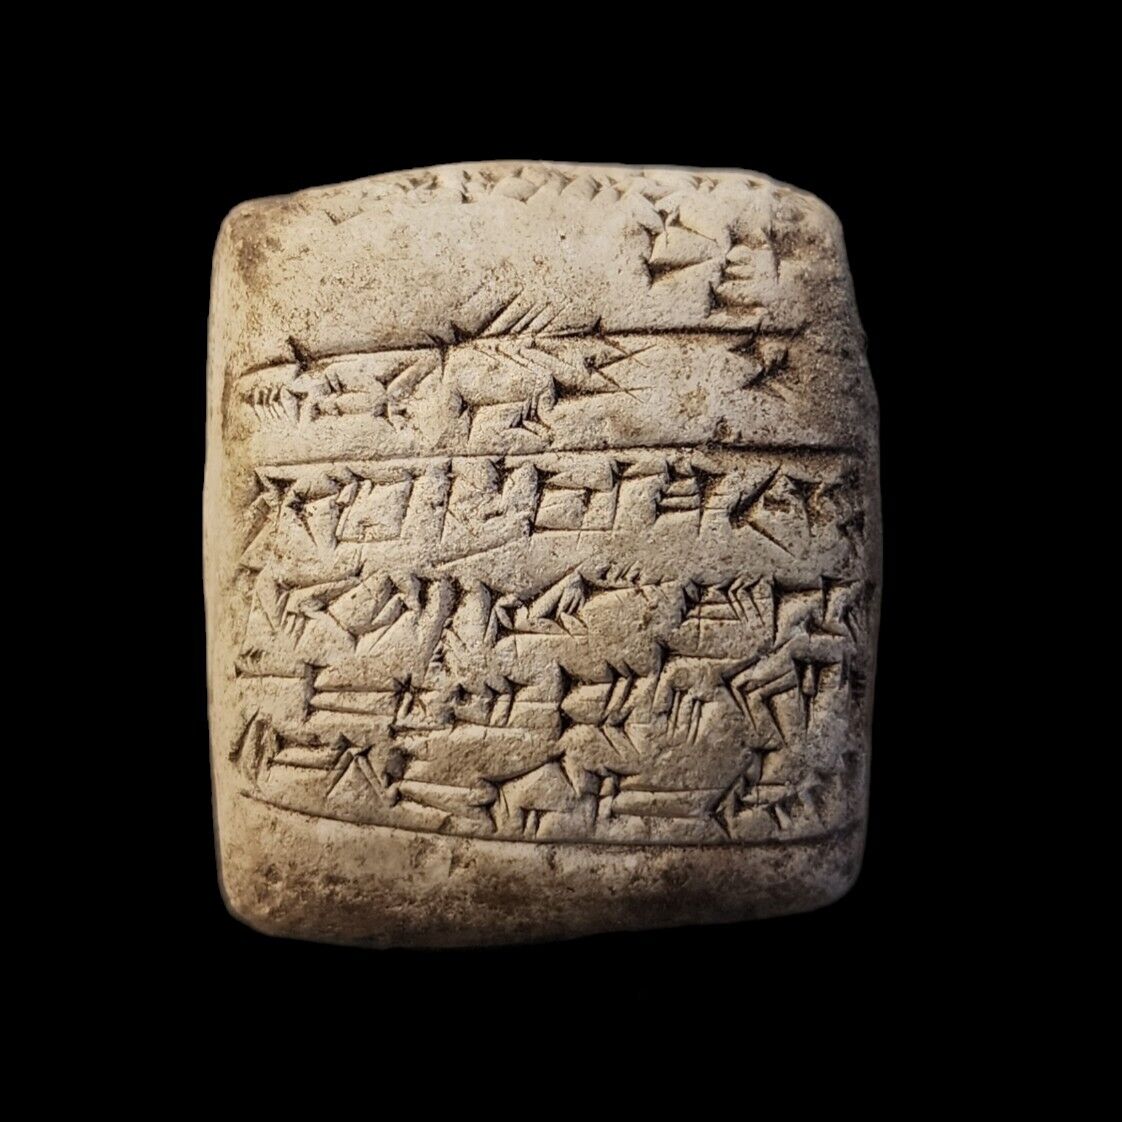 CIRCA NEAR EASTERN CUNEIFORM CLAY TABLET WITH EARLY FORM OF WRITINGS.